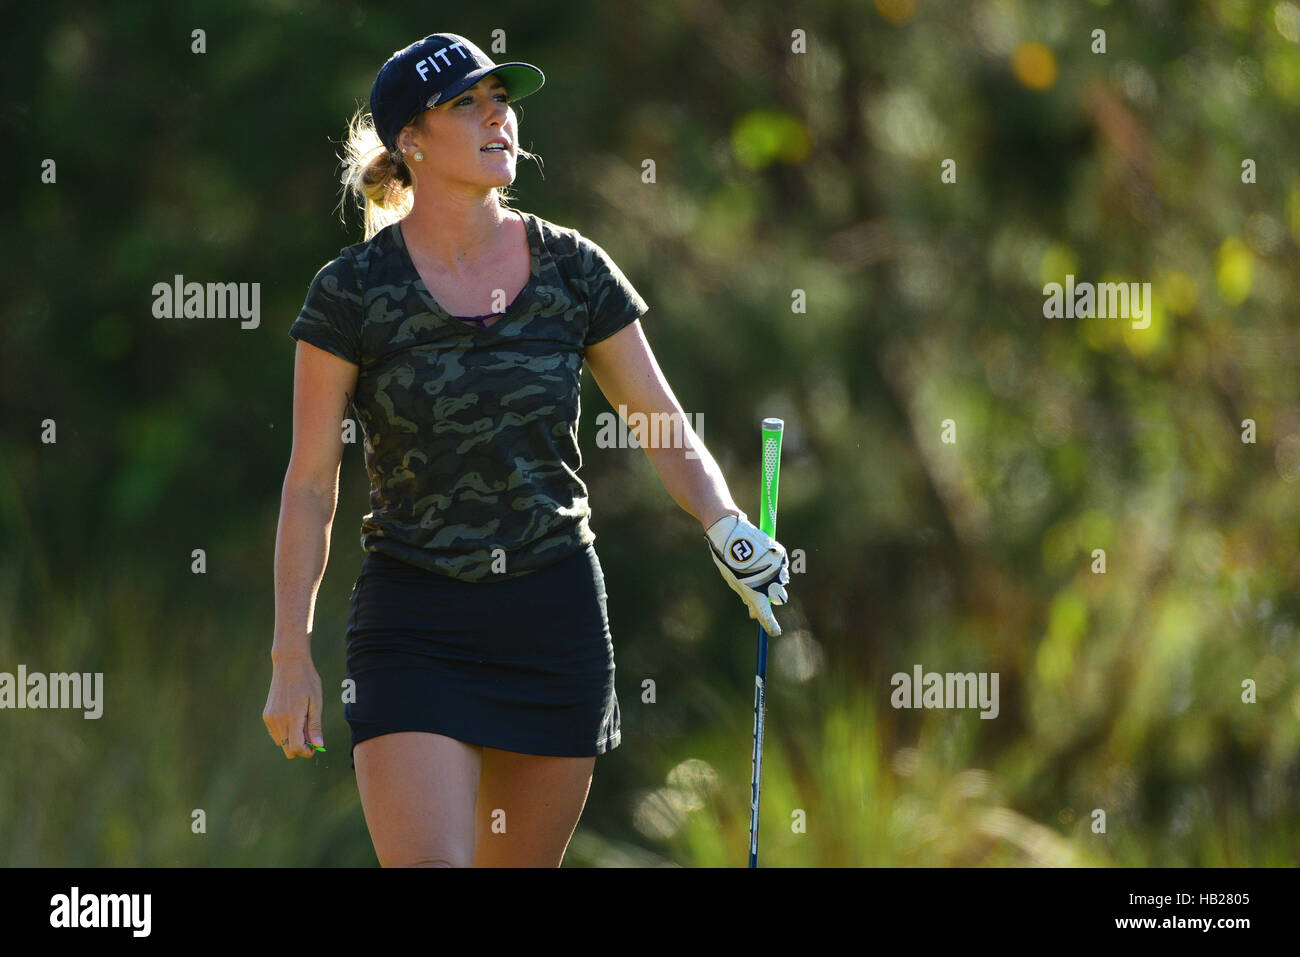 Daytona Beach, Florida, USA. 4th Dec, 2016. Jaye Marie Green during the final round at LPGA Q-School Stage 3 on the Hills Course at LPGA International in Daytona Beach, Florida on Dec. 4, 2016.ZUMA Press/Scott A. Miller Credit:  Scott A. Miller/ZUMA Wire/Alamy Live News Stock Photo